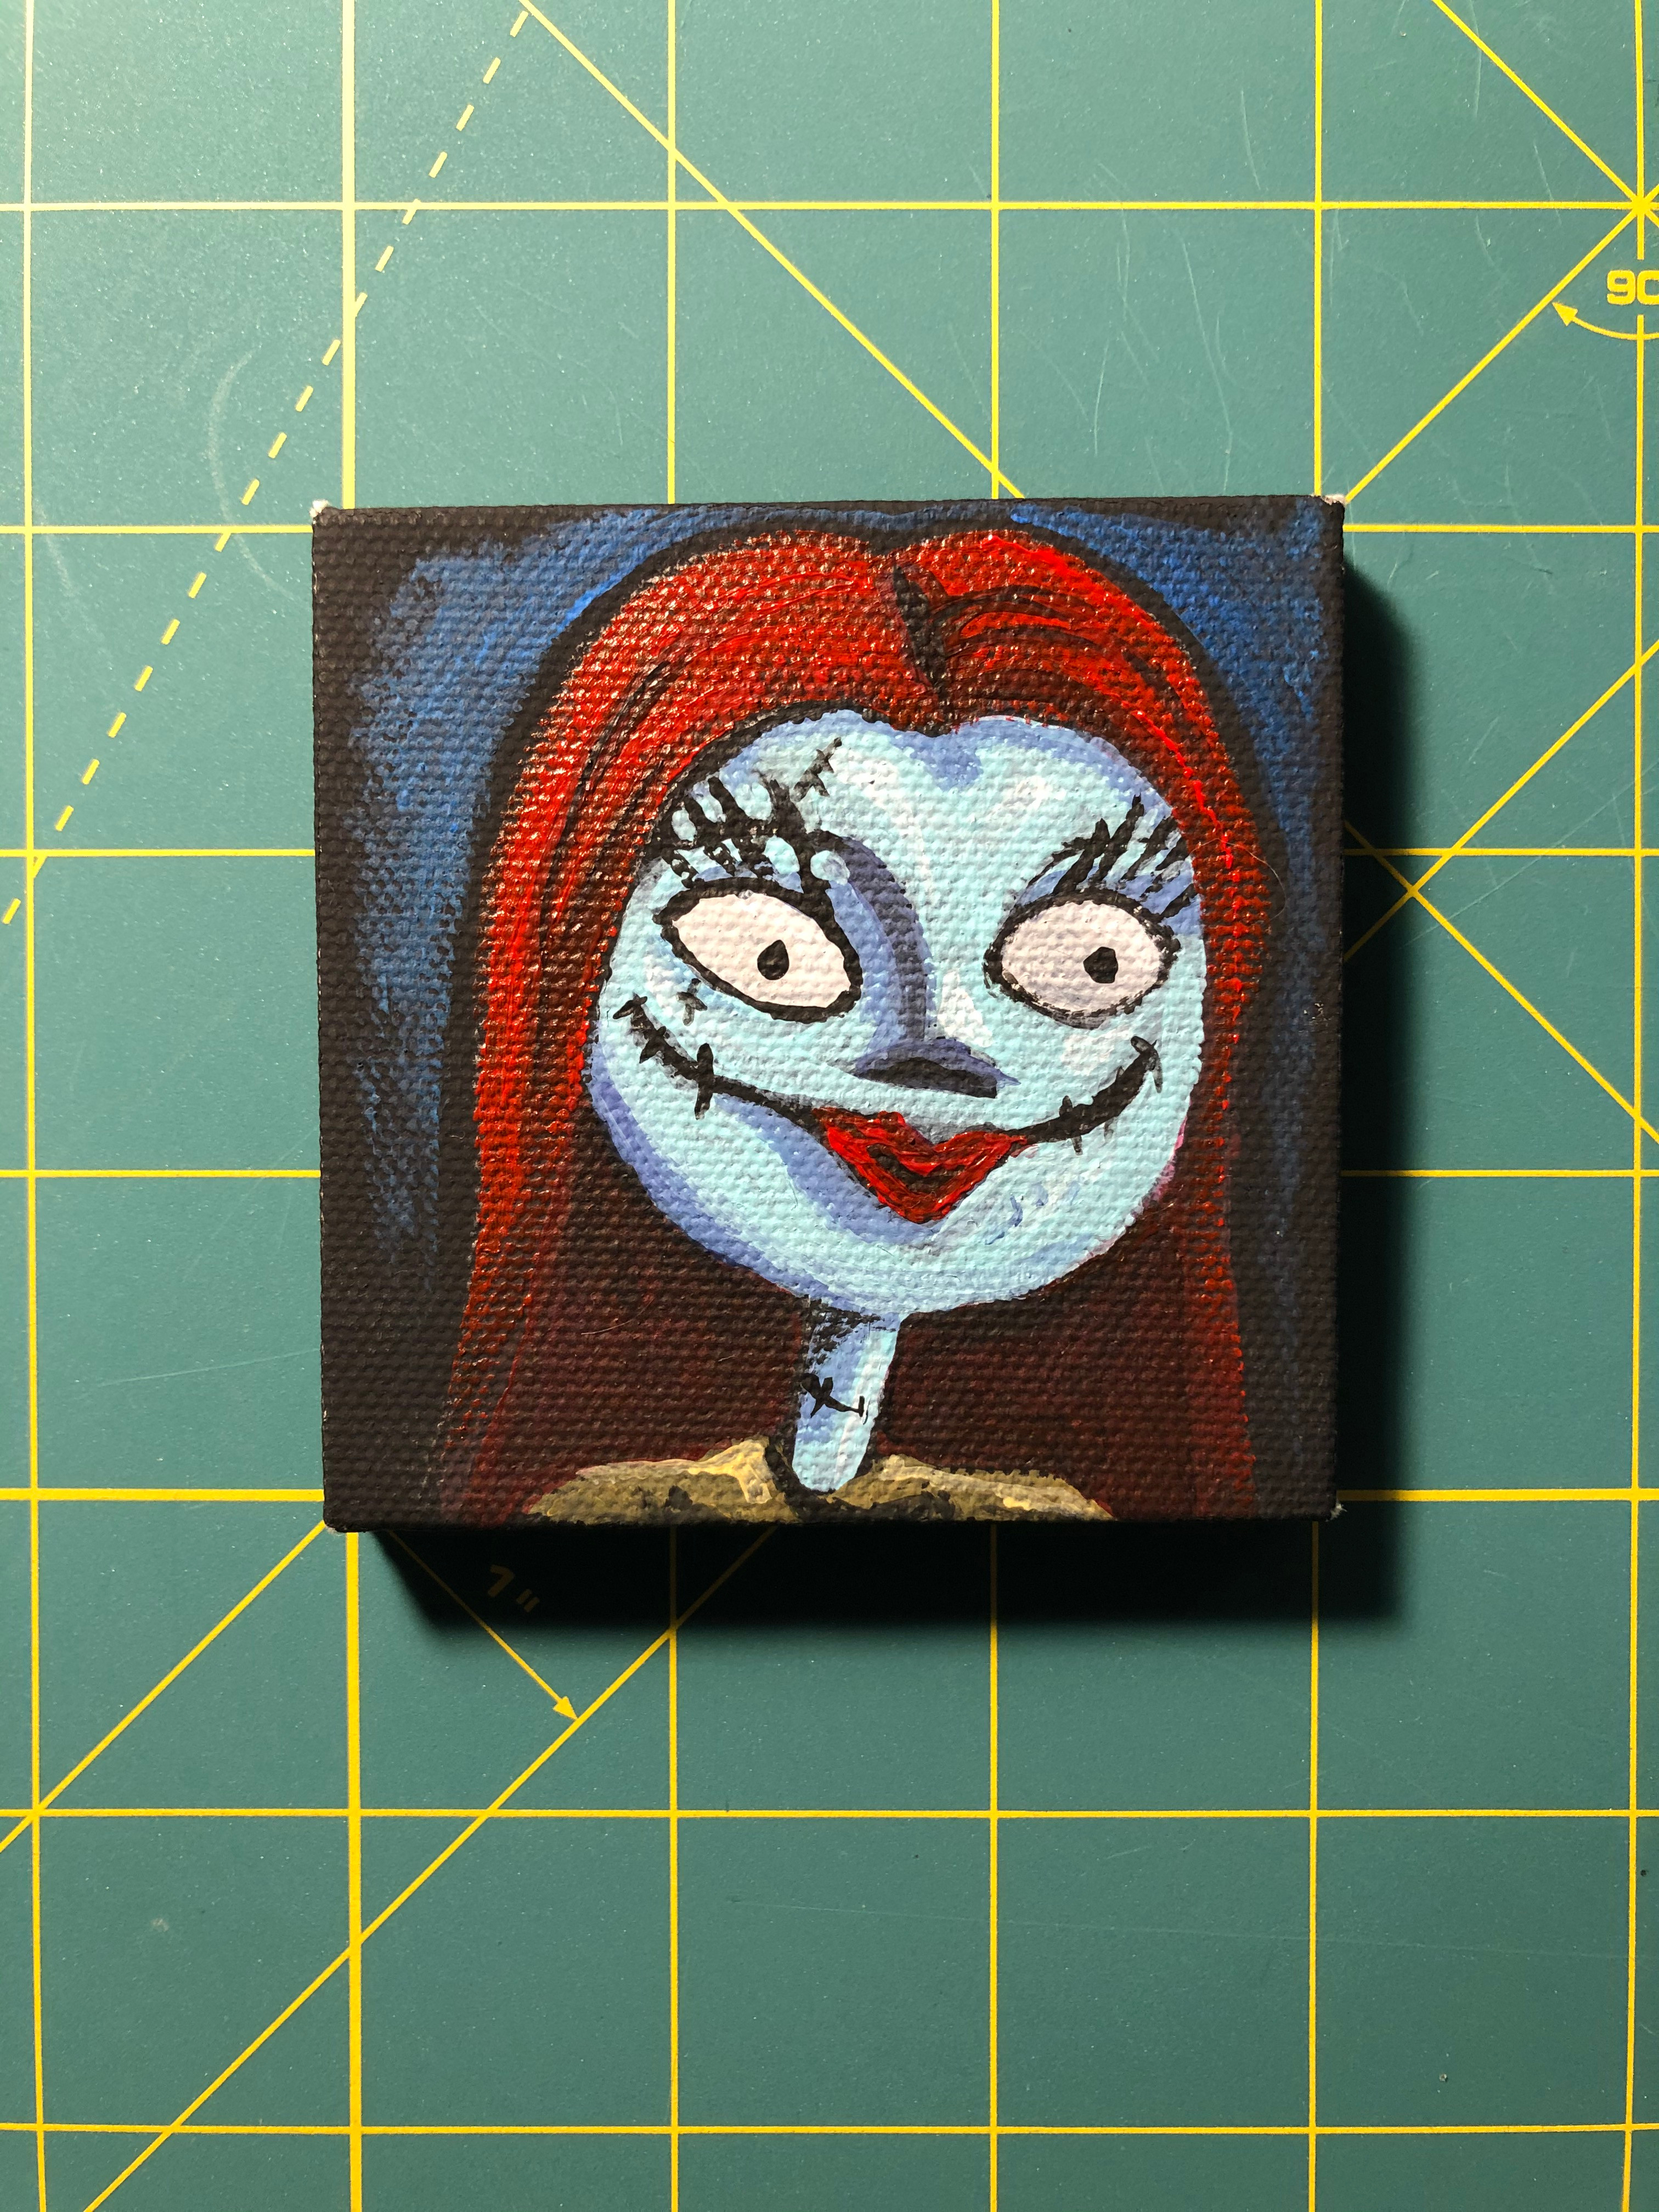 Nightmare Before Christmas, Sally. Acrylic paintings on black mini canvas, 3x3 in.